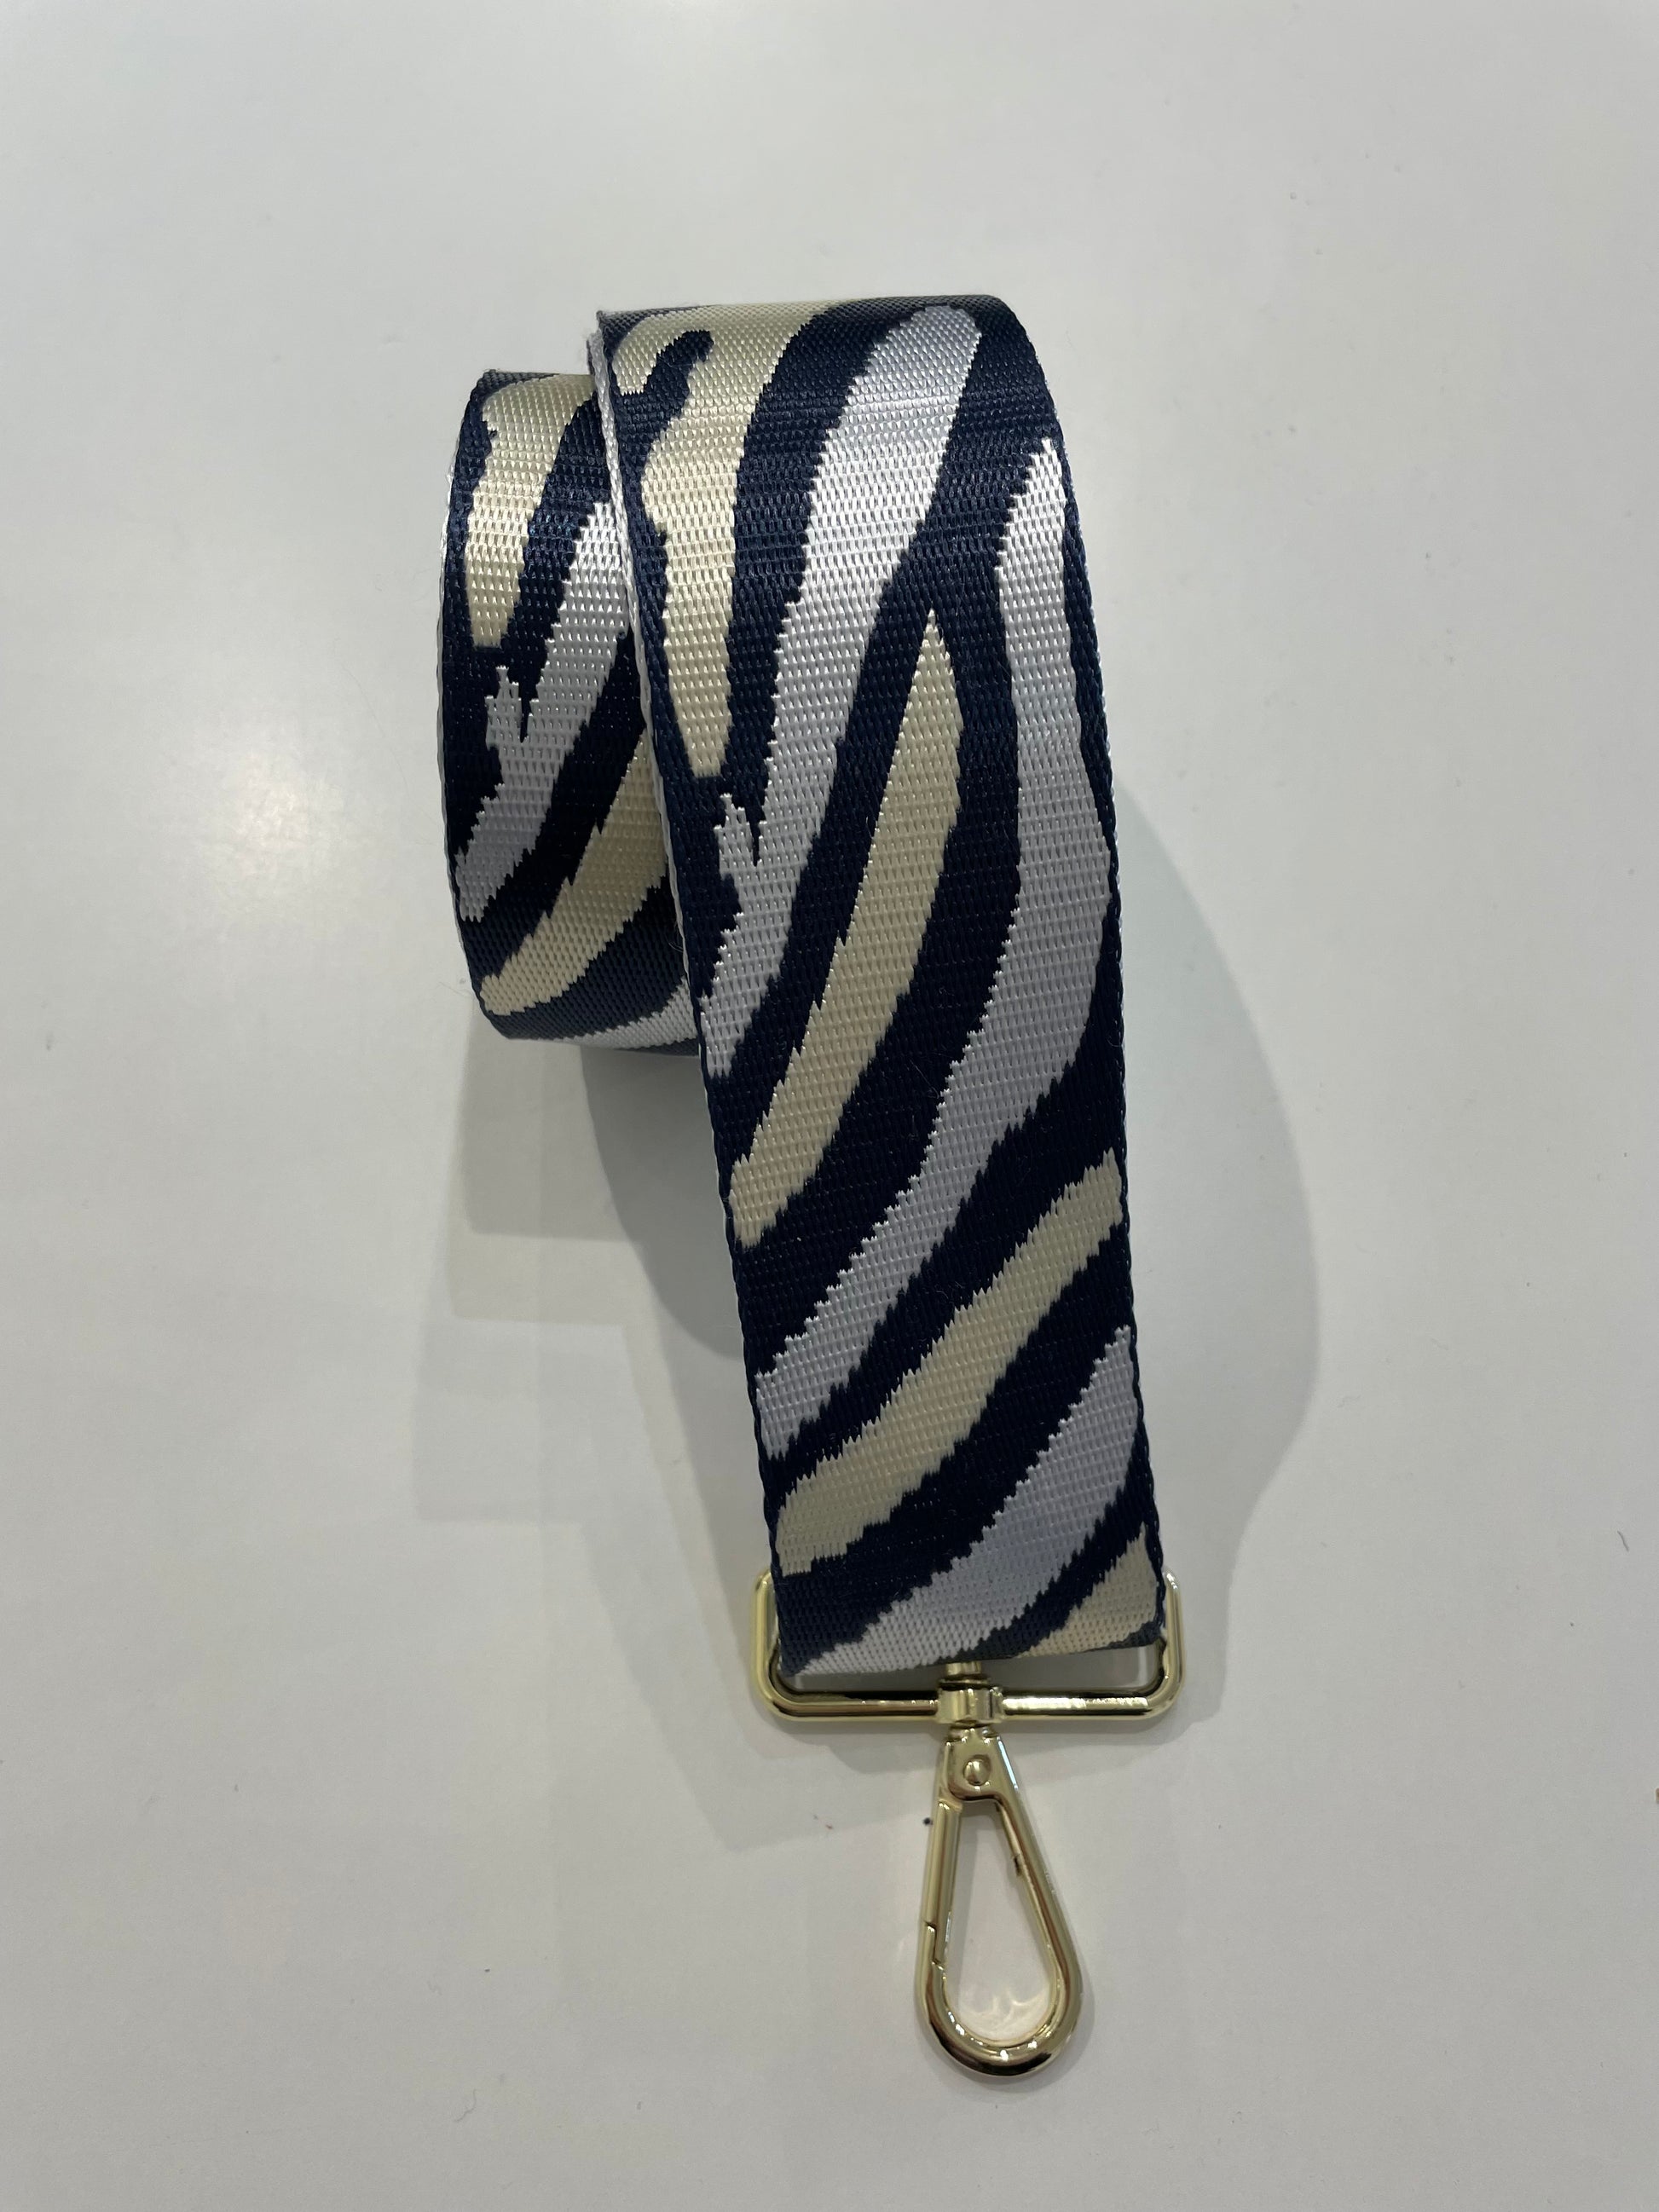 Tiger Stripe Bag Strap Navy, Pale Yellow and Grey